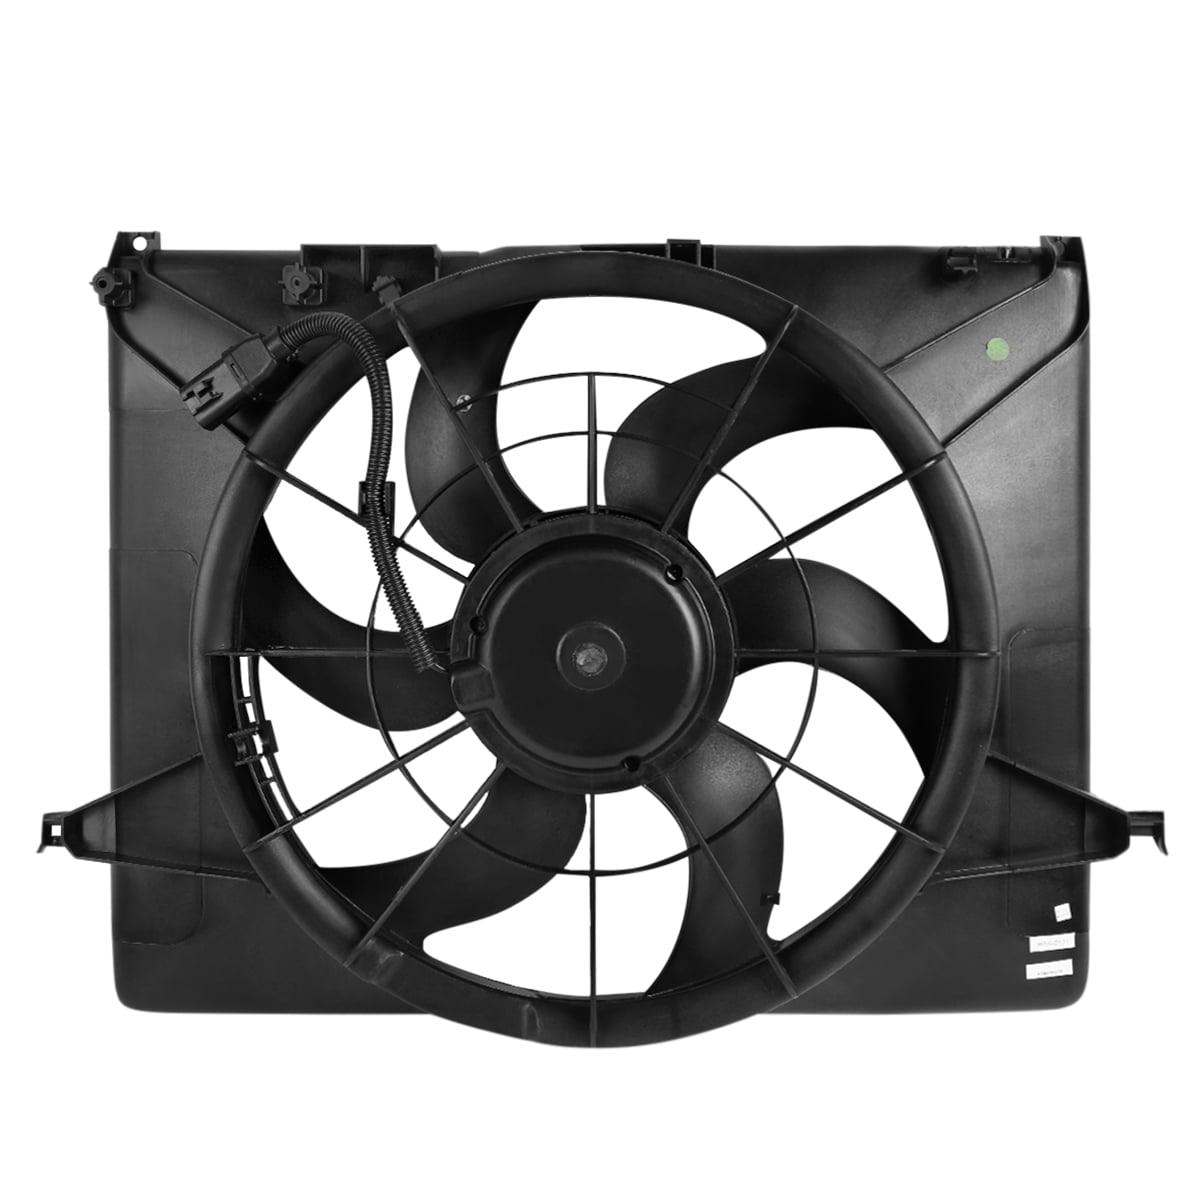 DNA Motoring OEM-RF-0016 HY3117100 Factory Style Radiator Cooling Fan Replacement